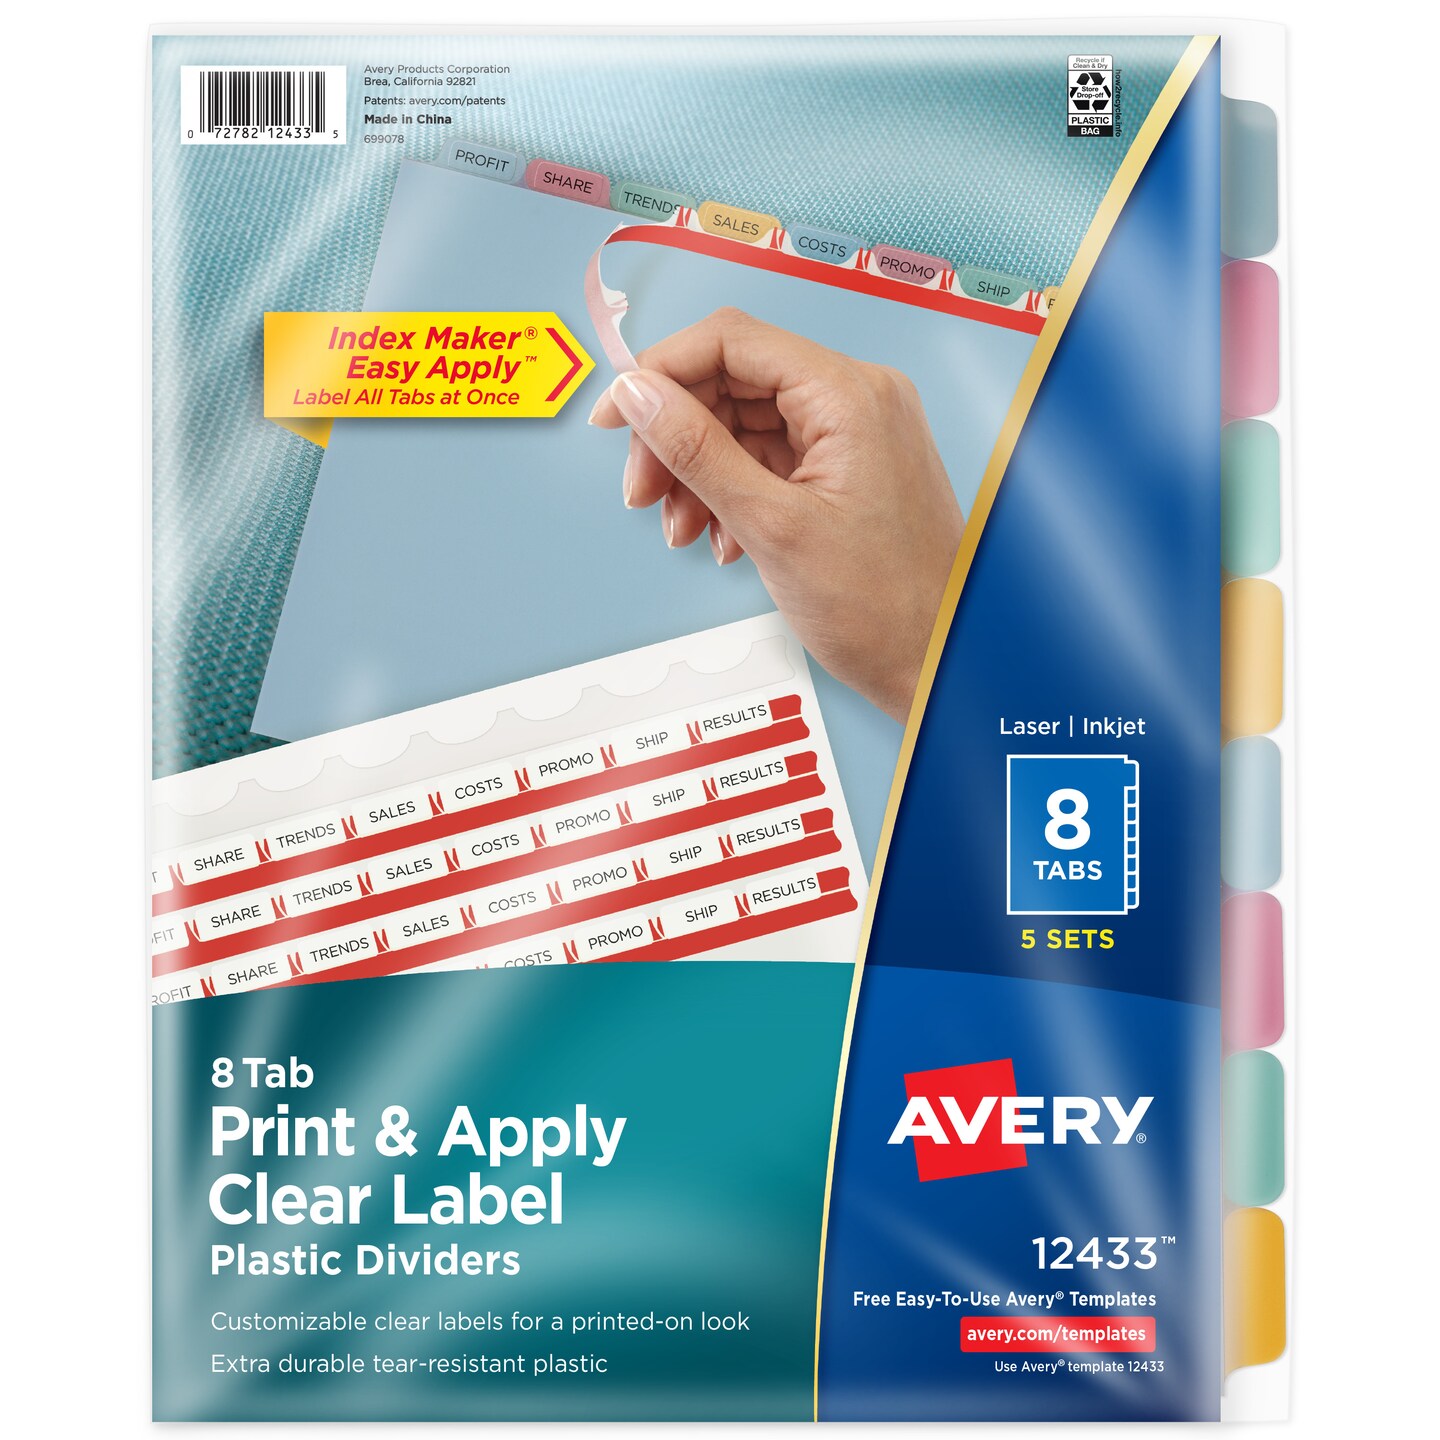 Avery 8 Tab Plastic Dividers for 3 Ring Binder, Easy Print & Apply ...